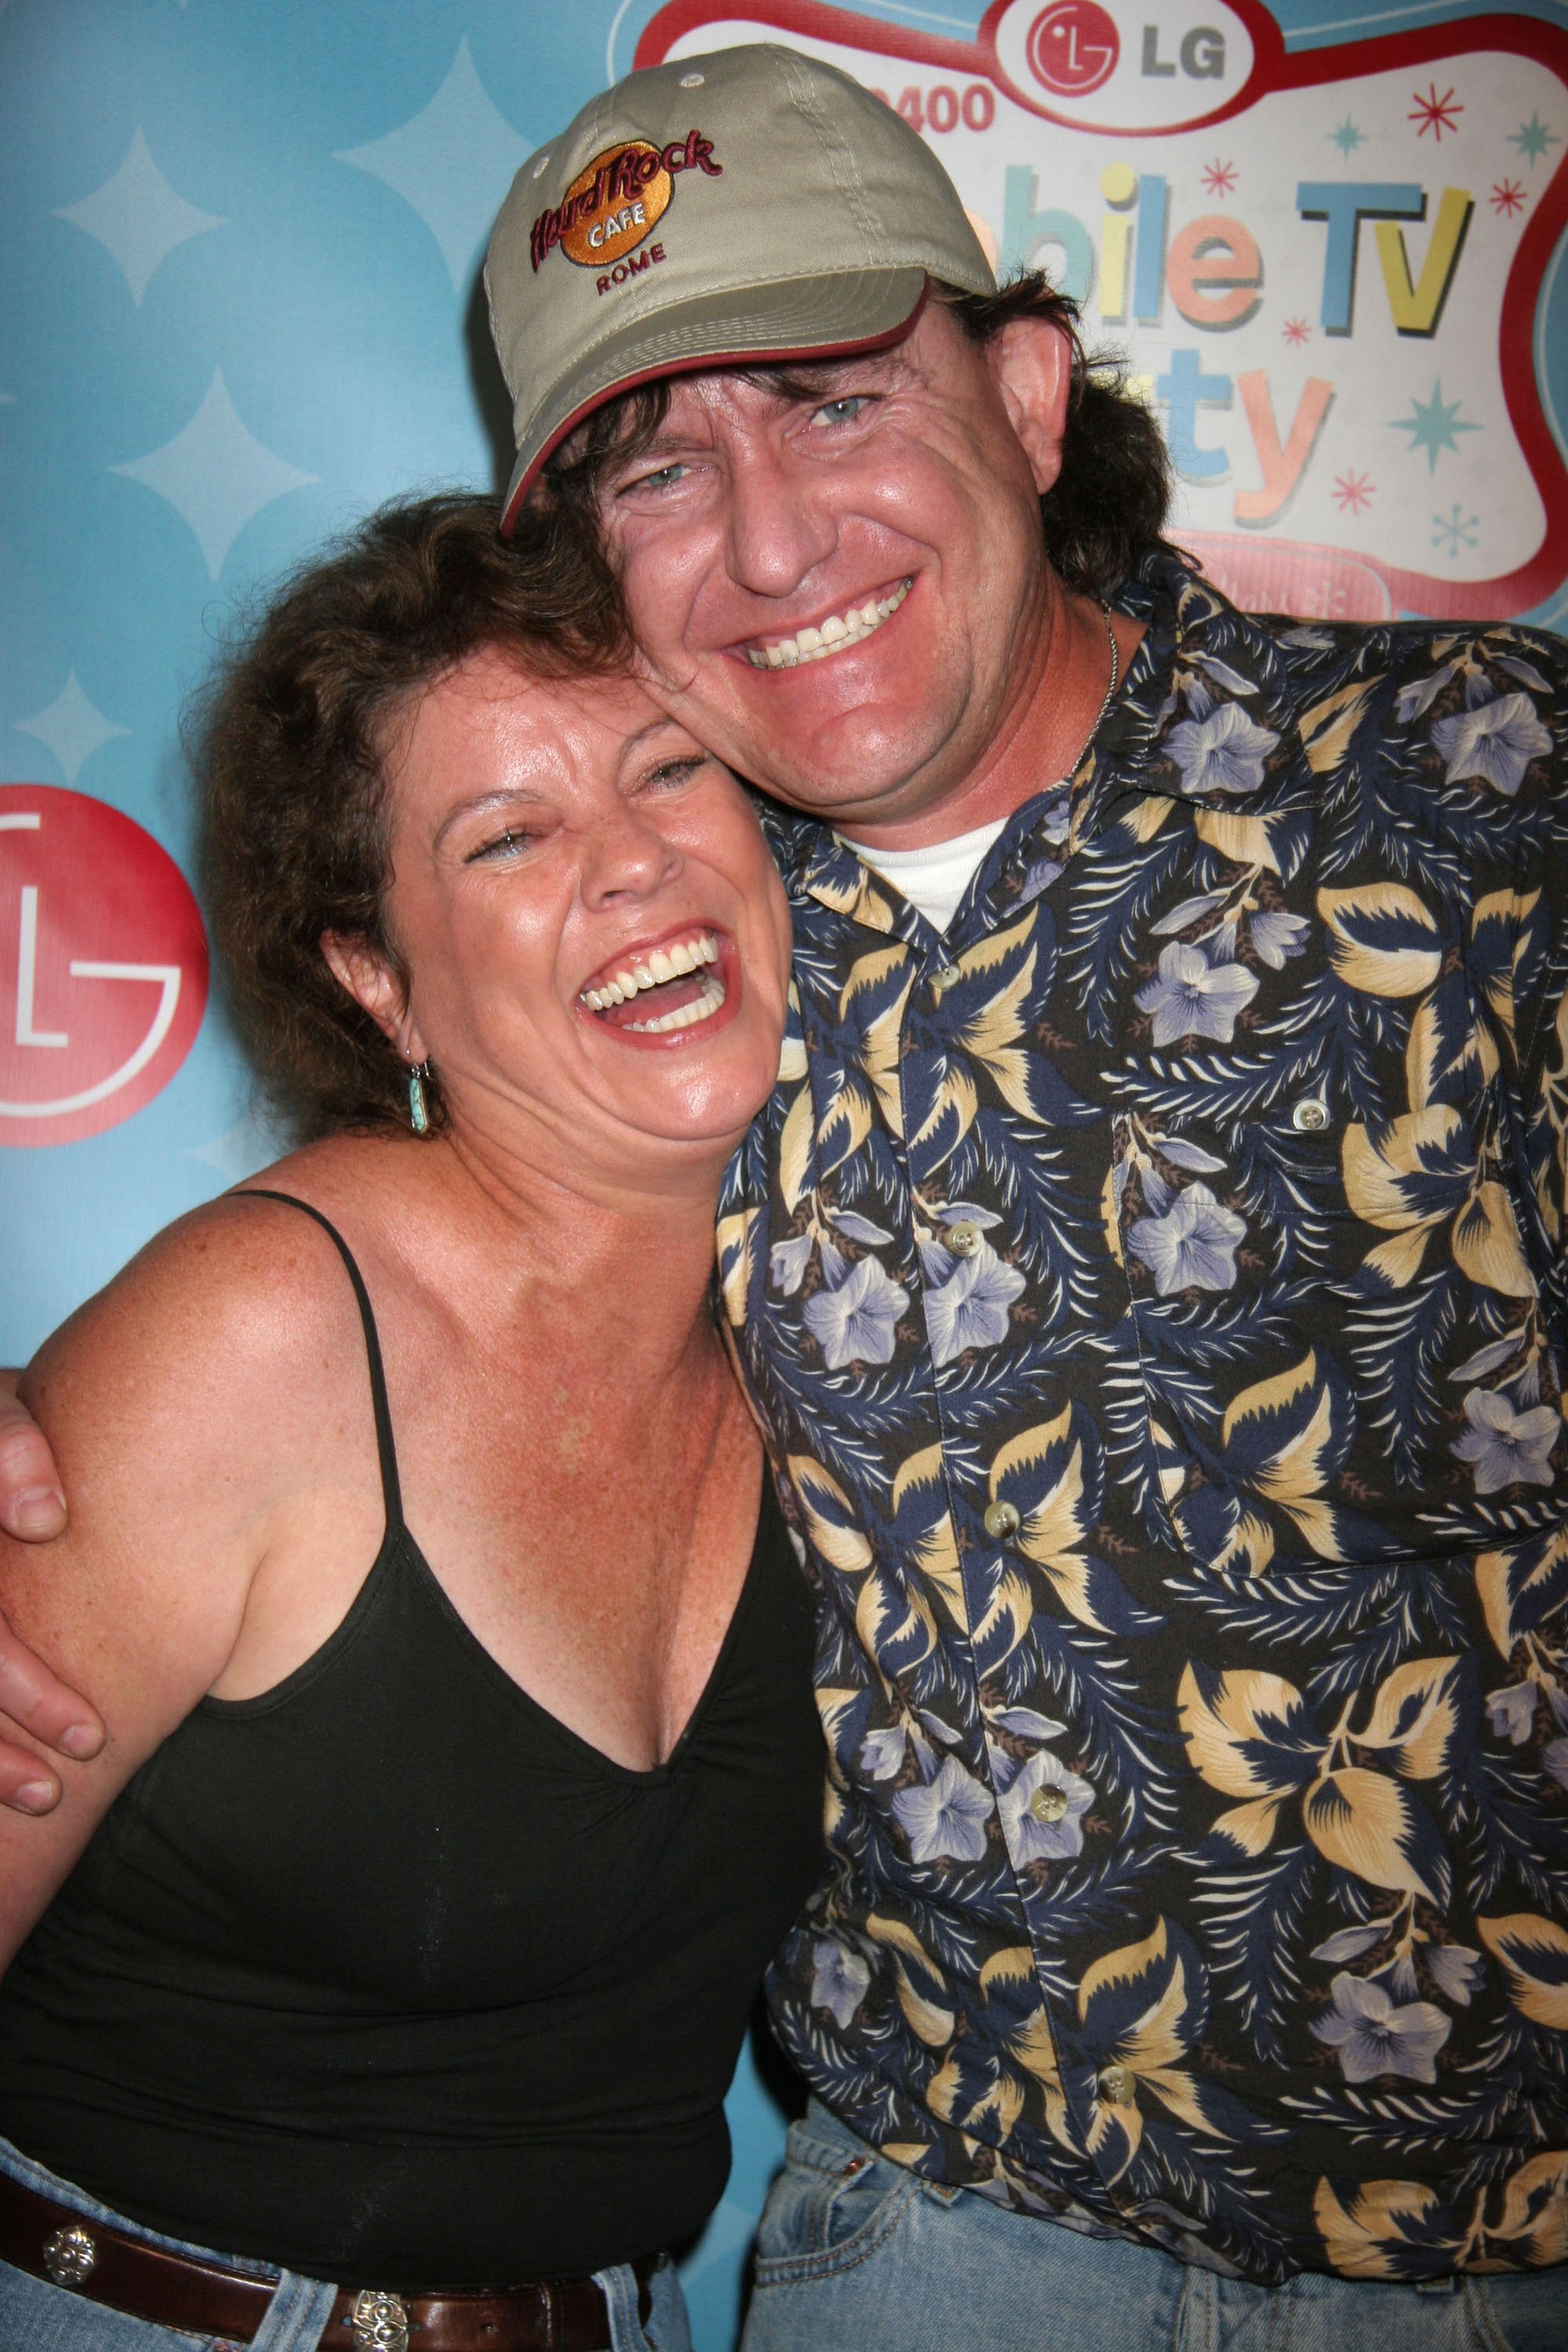 Erin Moran and husband Steven Fleischmann during LG Mobile TV Party at Stage 14 - Paramount Studios in Hollywood, CA, United States | Source: Getty Images 